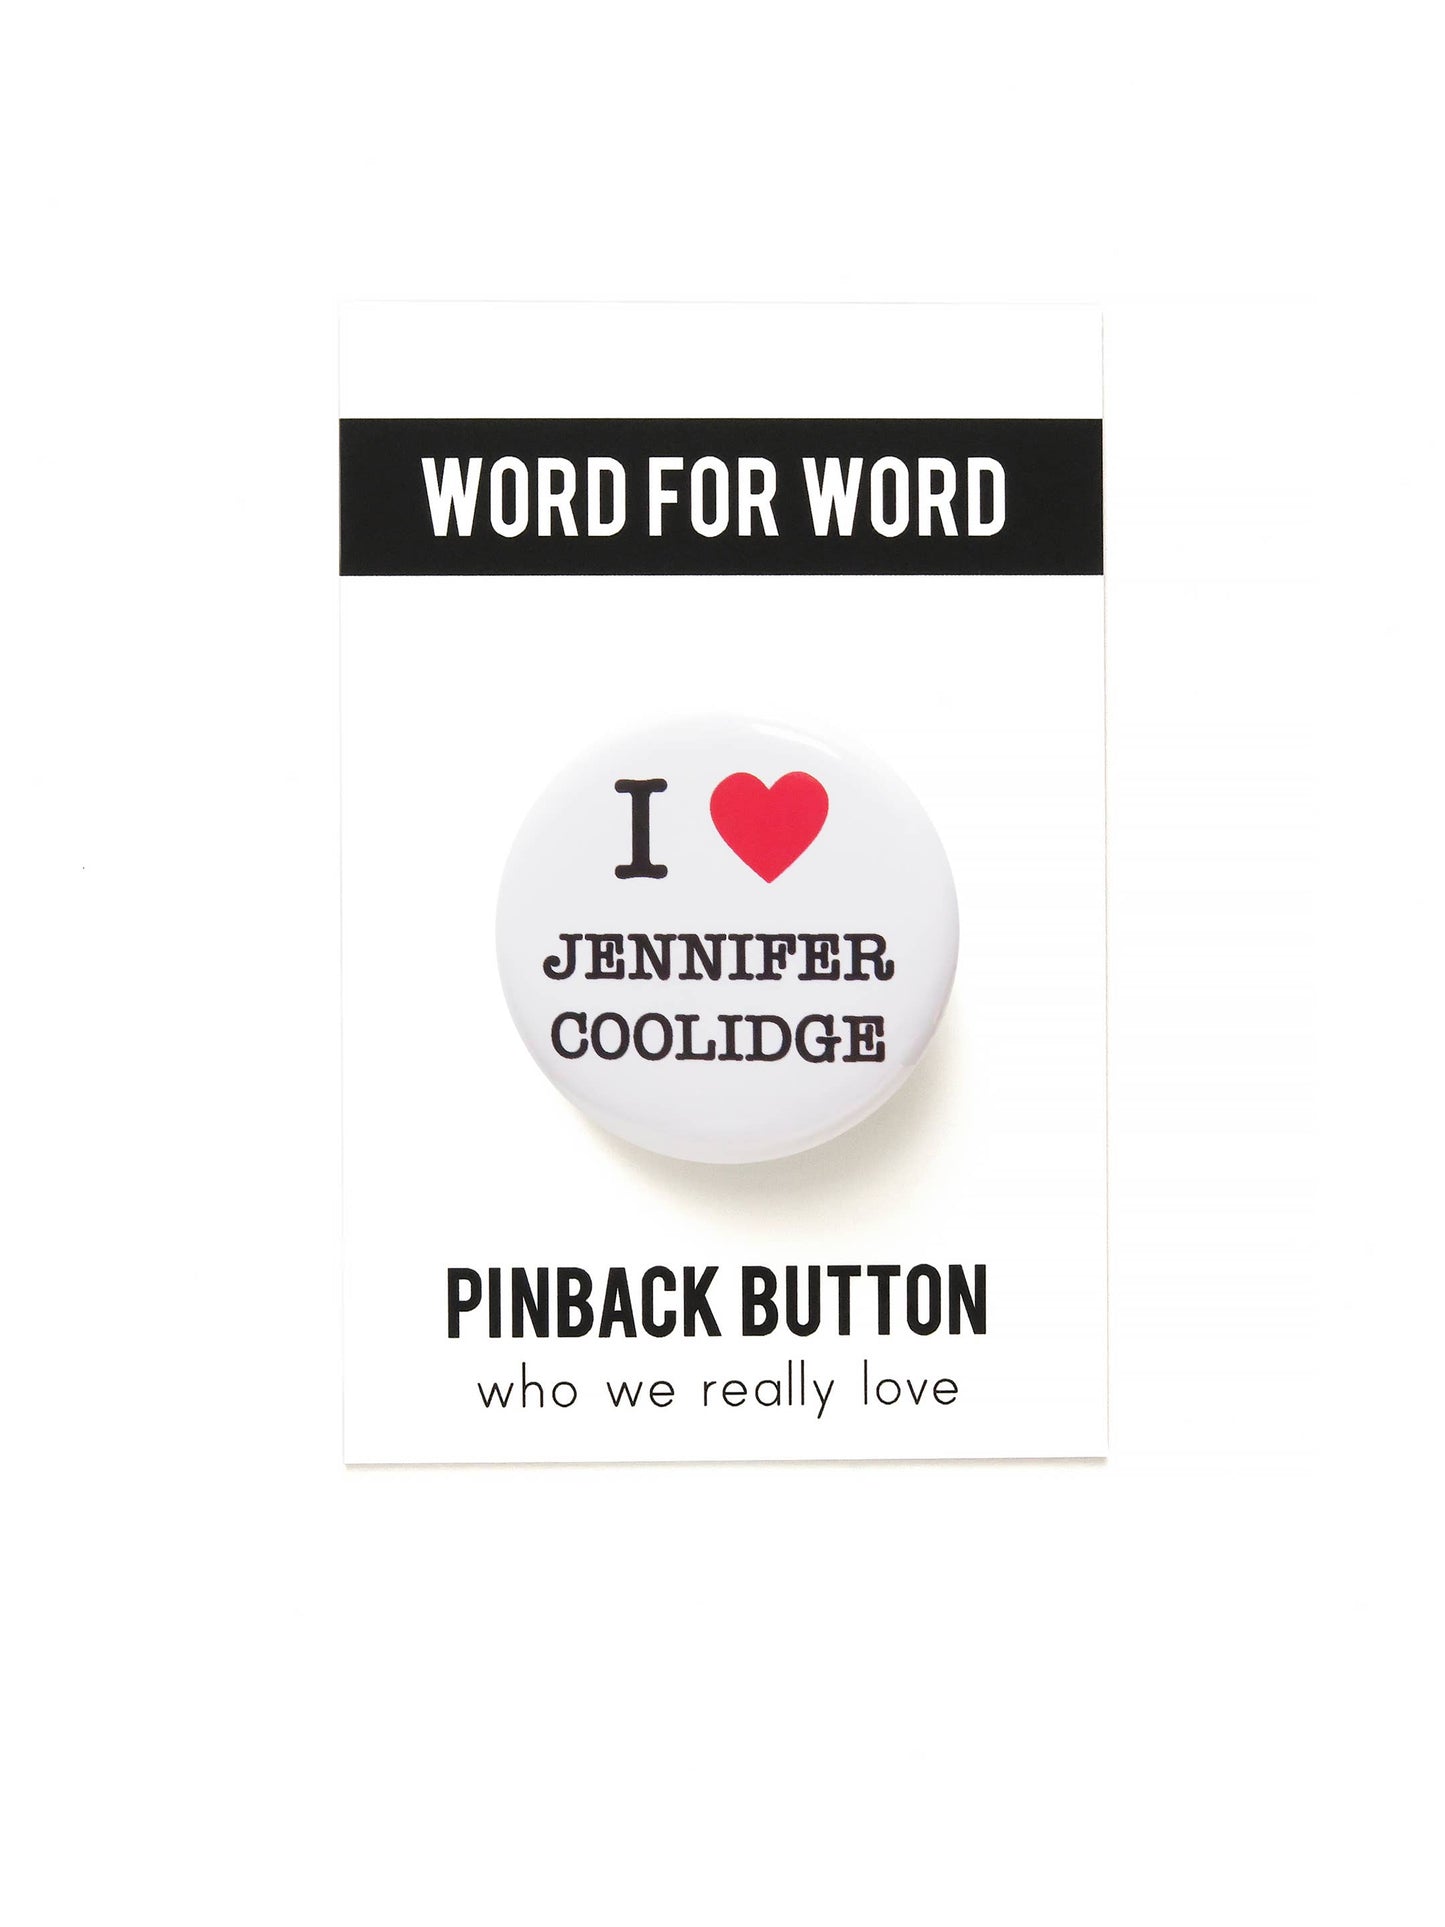 WORD FOR WORD Factory - JENNIFER COOLIDGE pinback buttons